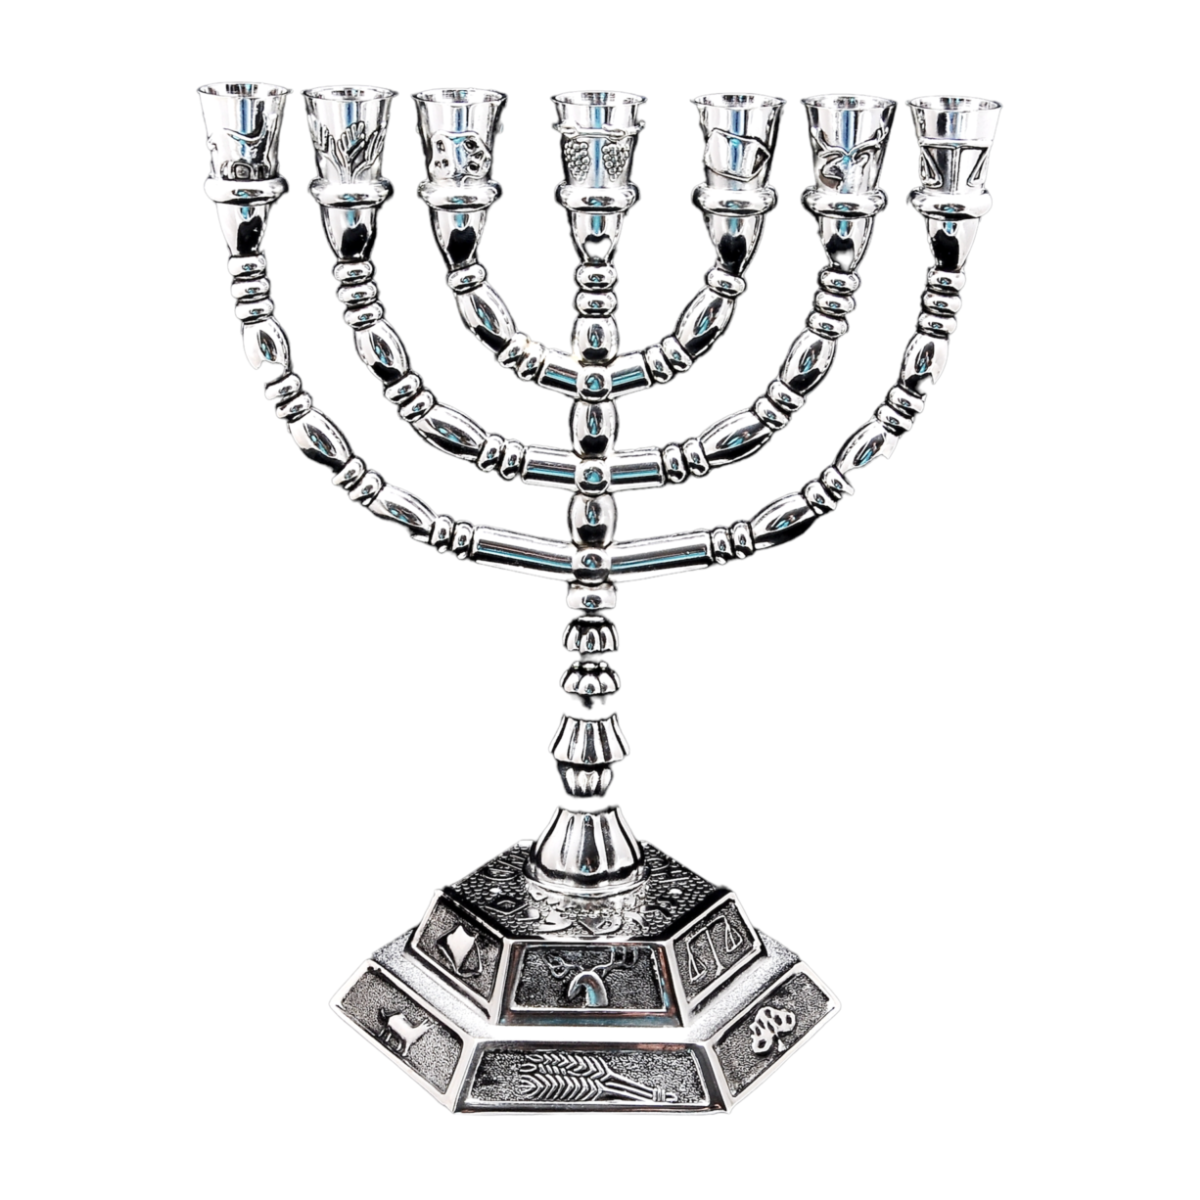 Menorah Silver Plated Candle Holder from Jerusalem 6.3″ / 16 cm